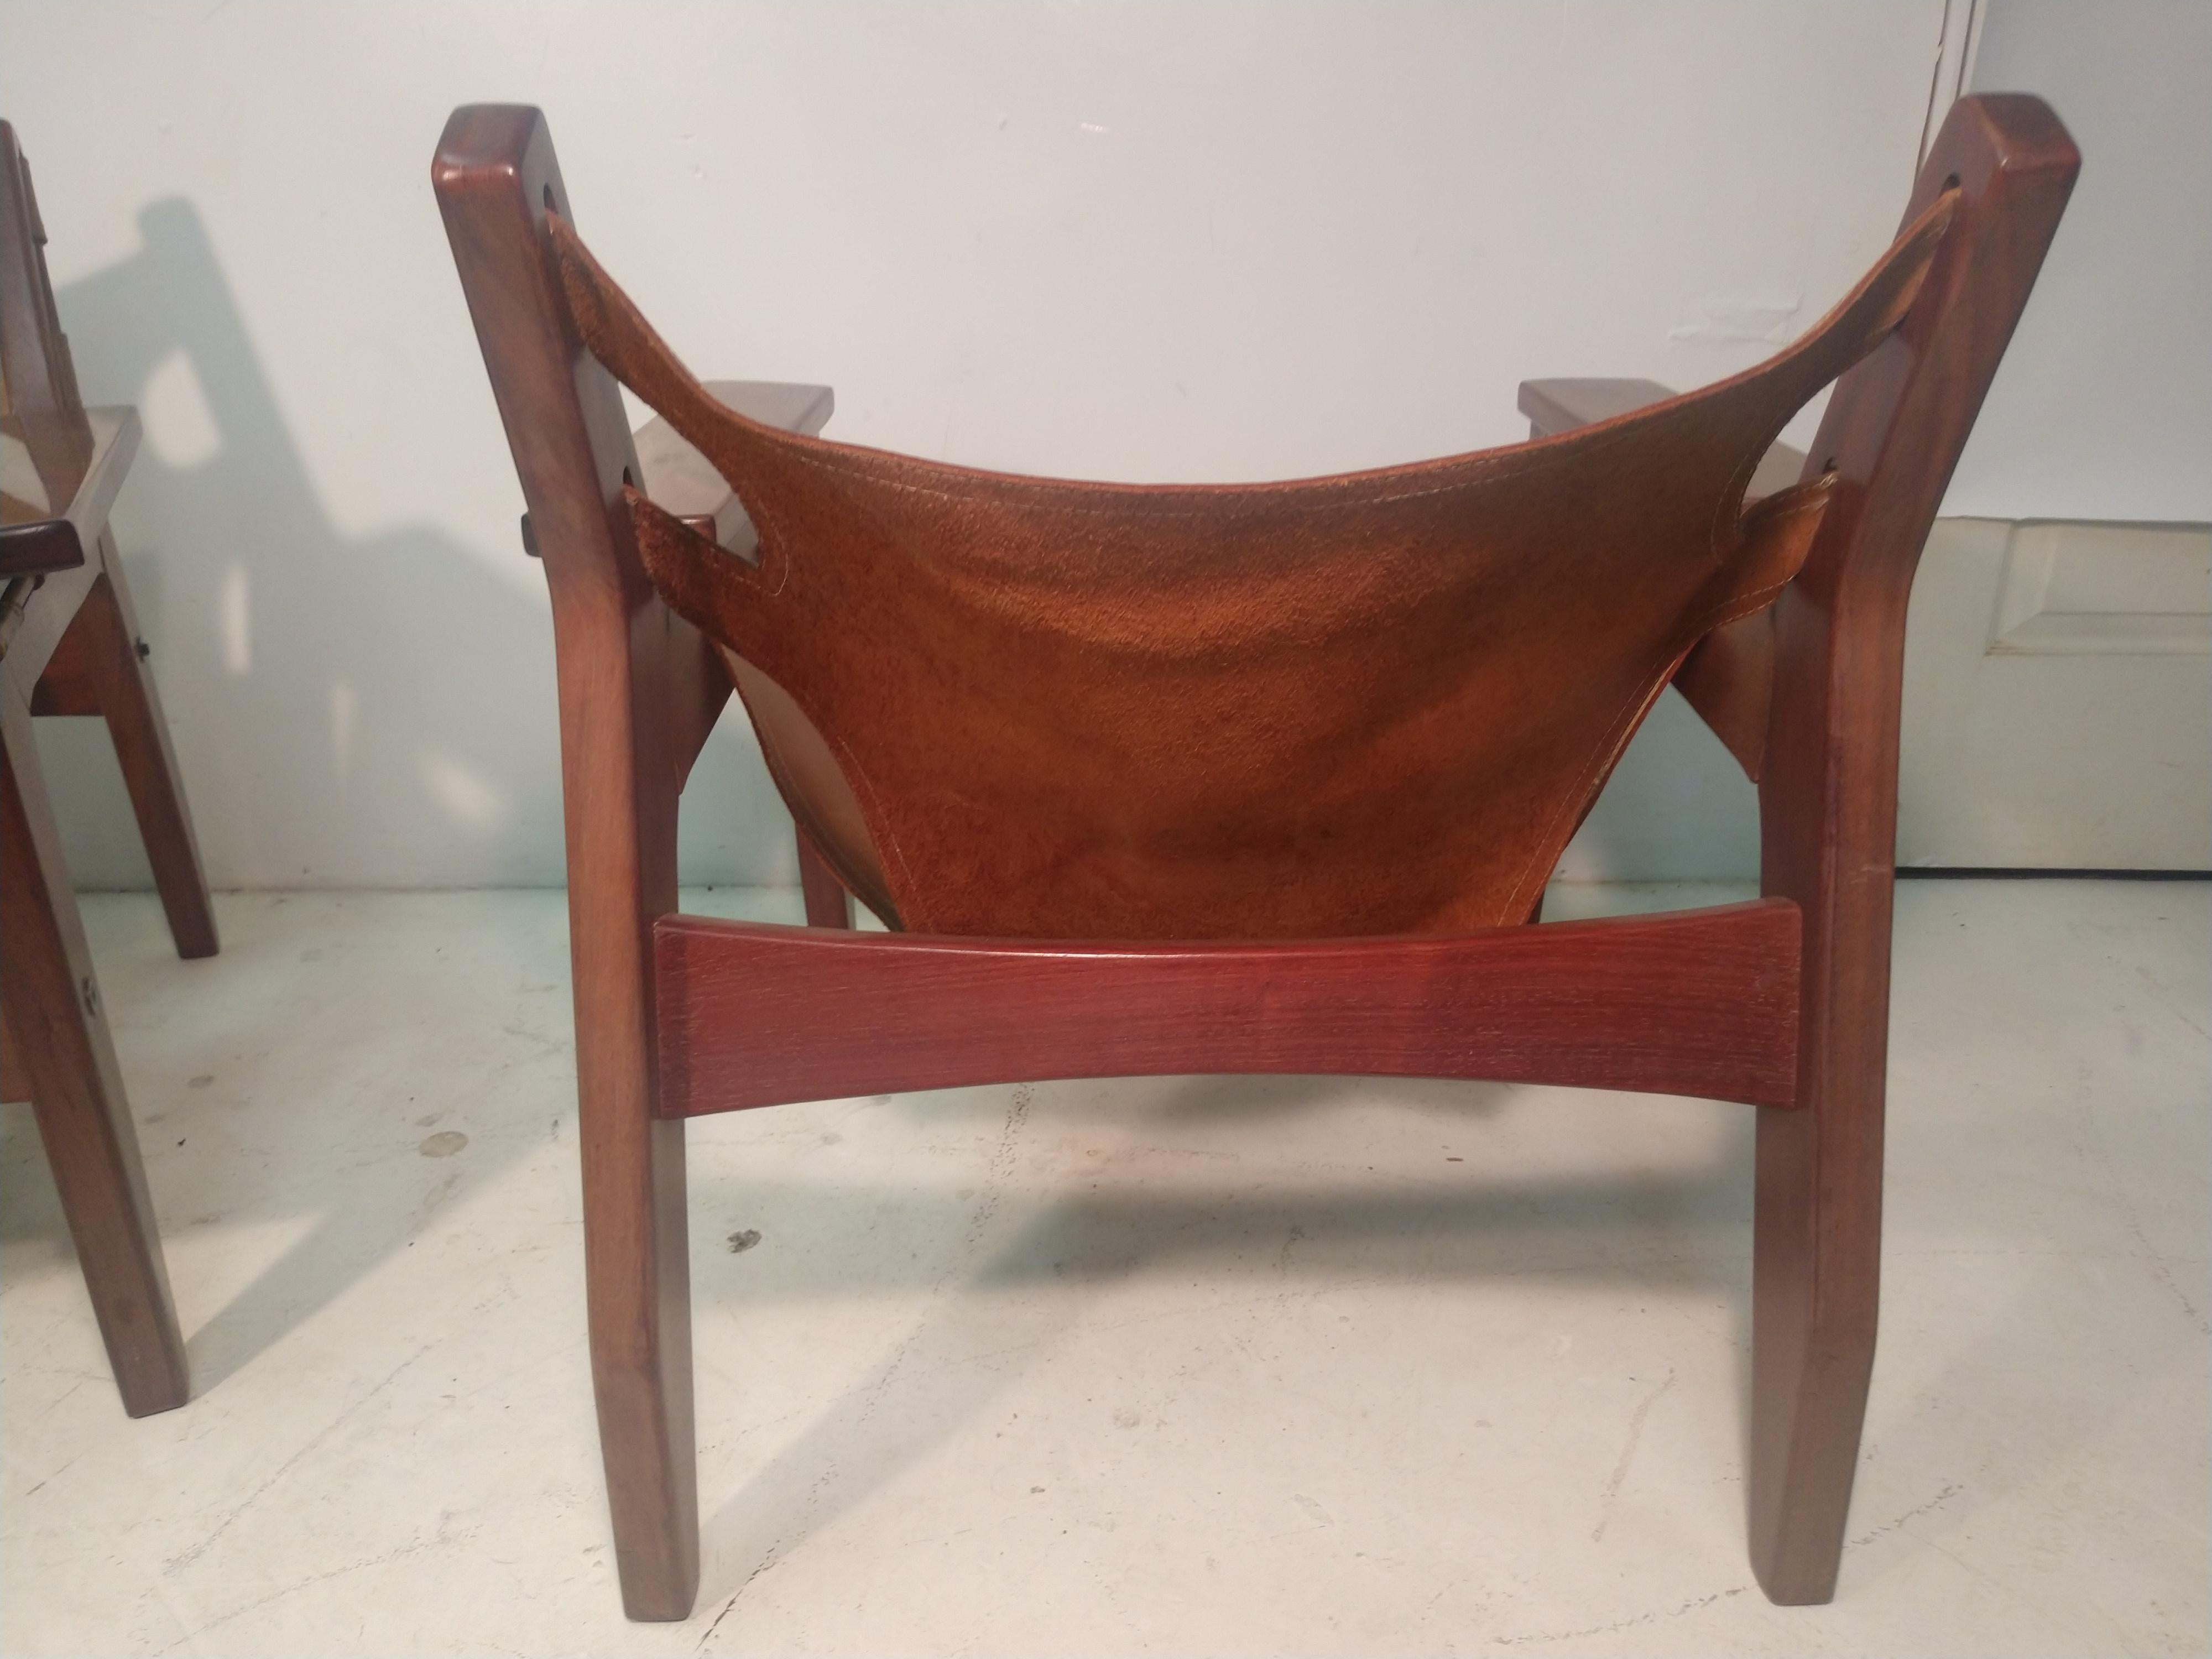 Pair of Mid-Century Modern Rosewood & Leather Lounge Chairs by Sergio Rodrigues 3